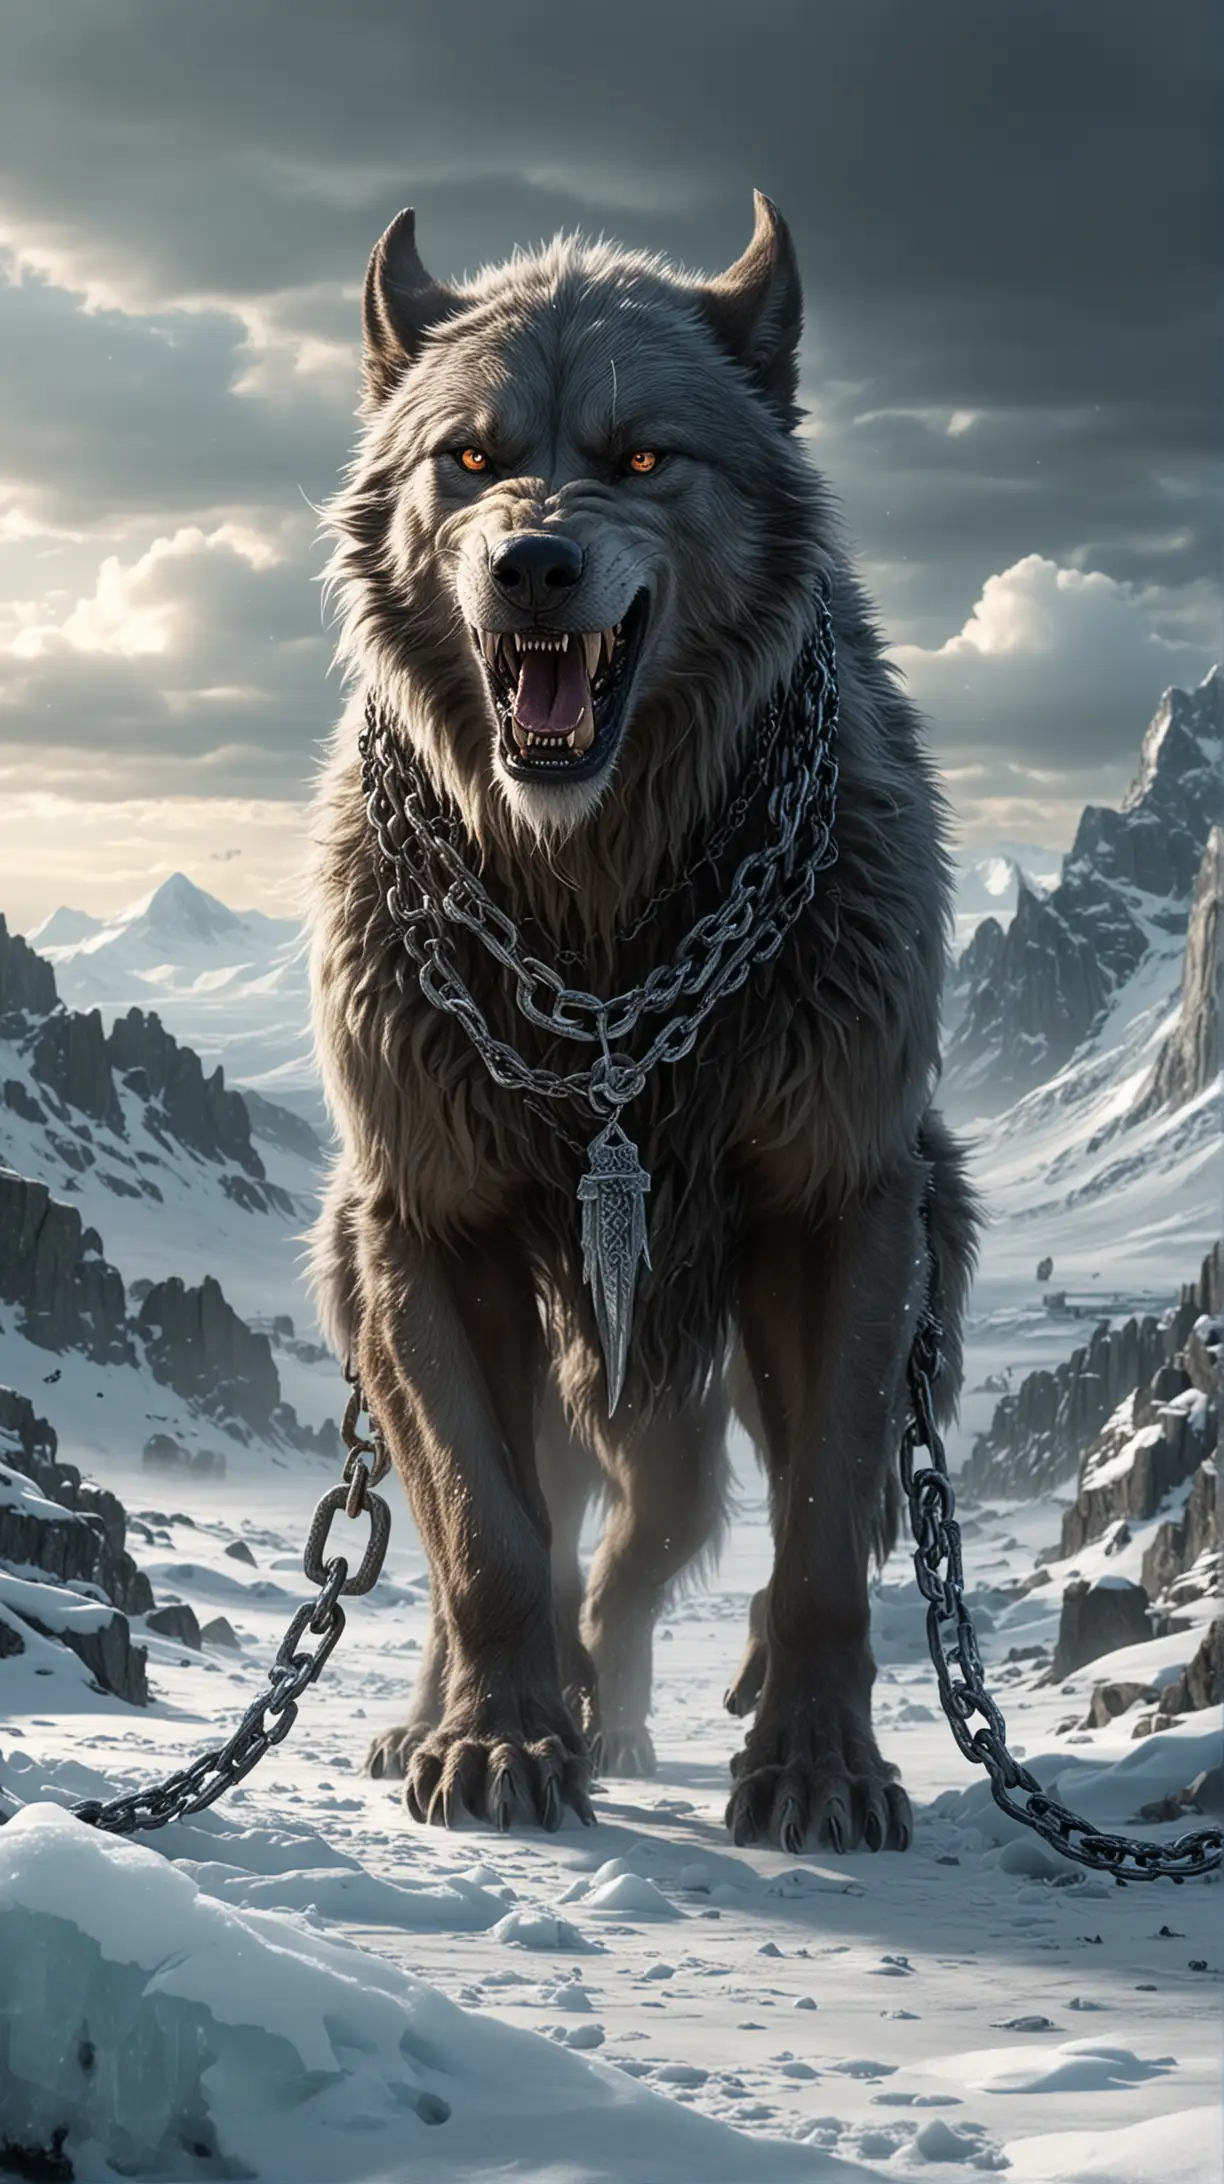 Fenrir as a giant wolf demon, small vikings trying to hook him with chains, ice and cold landscapes and very small vikings on background, photo-realistic, hyper-realistic